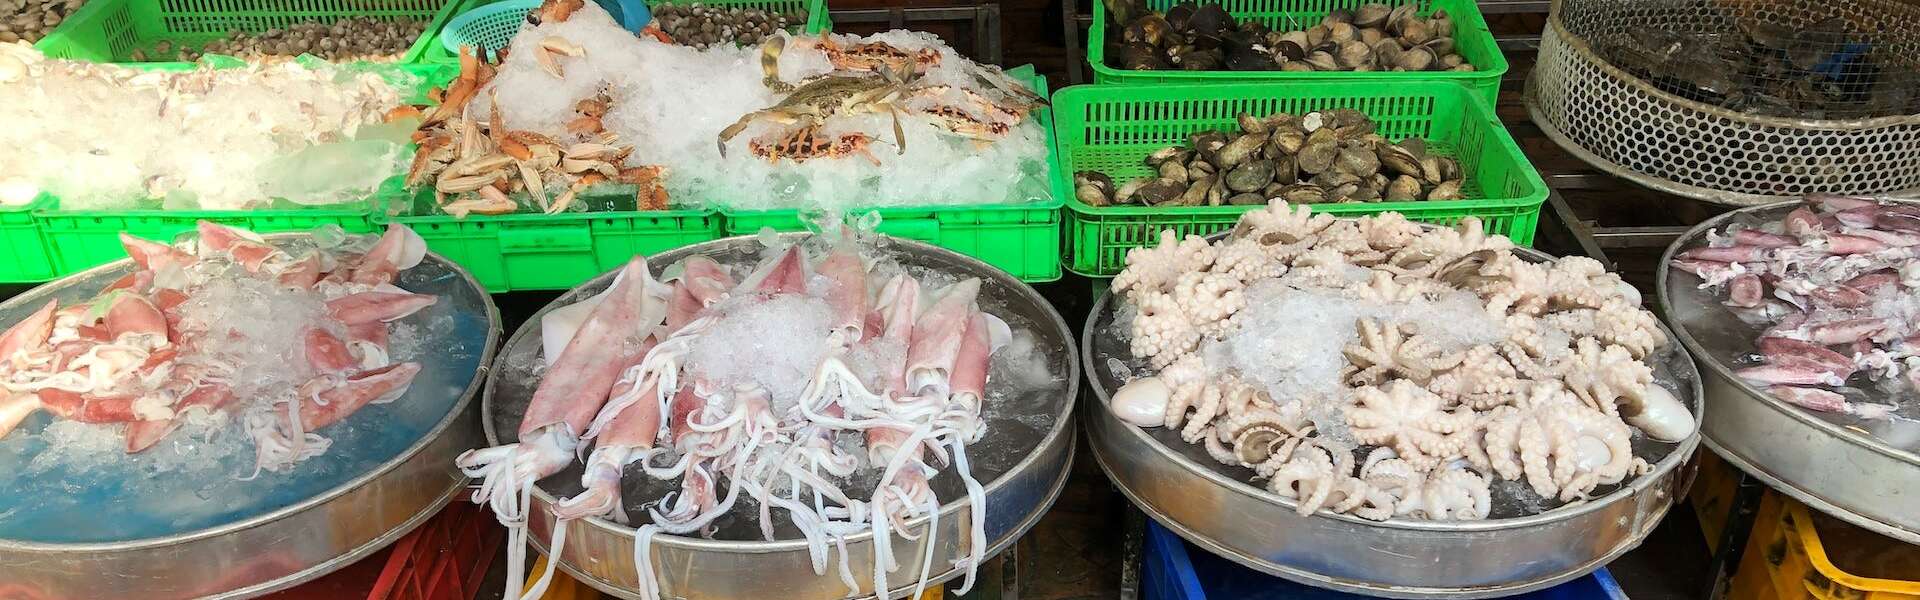 several kinds of shellfish sit in ice-filled containers at an outdoor market